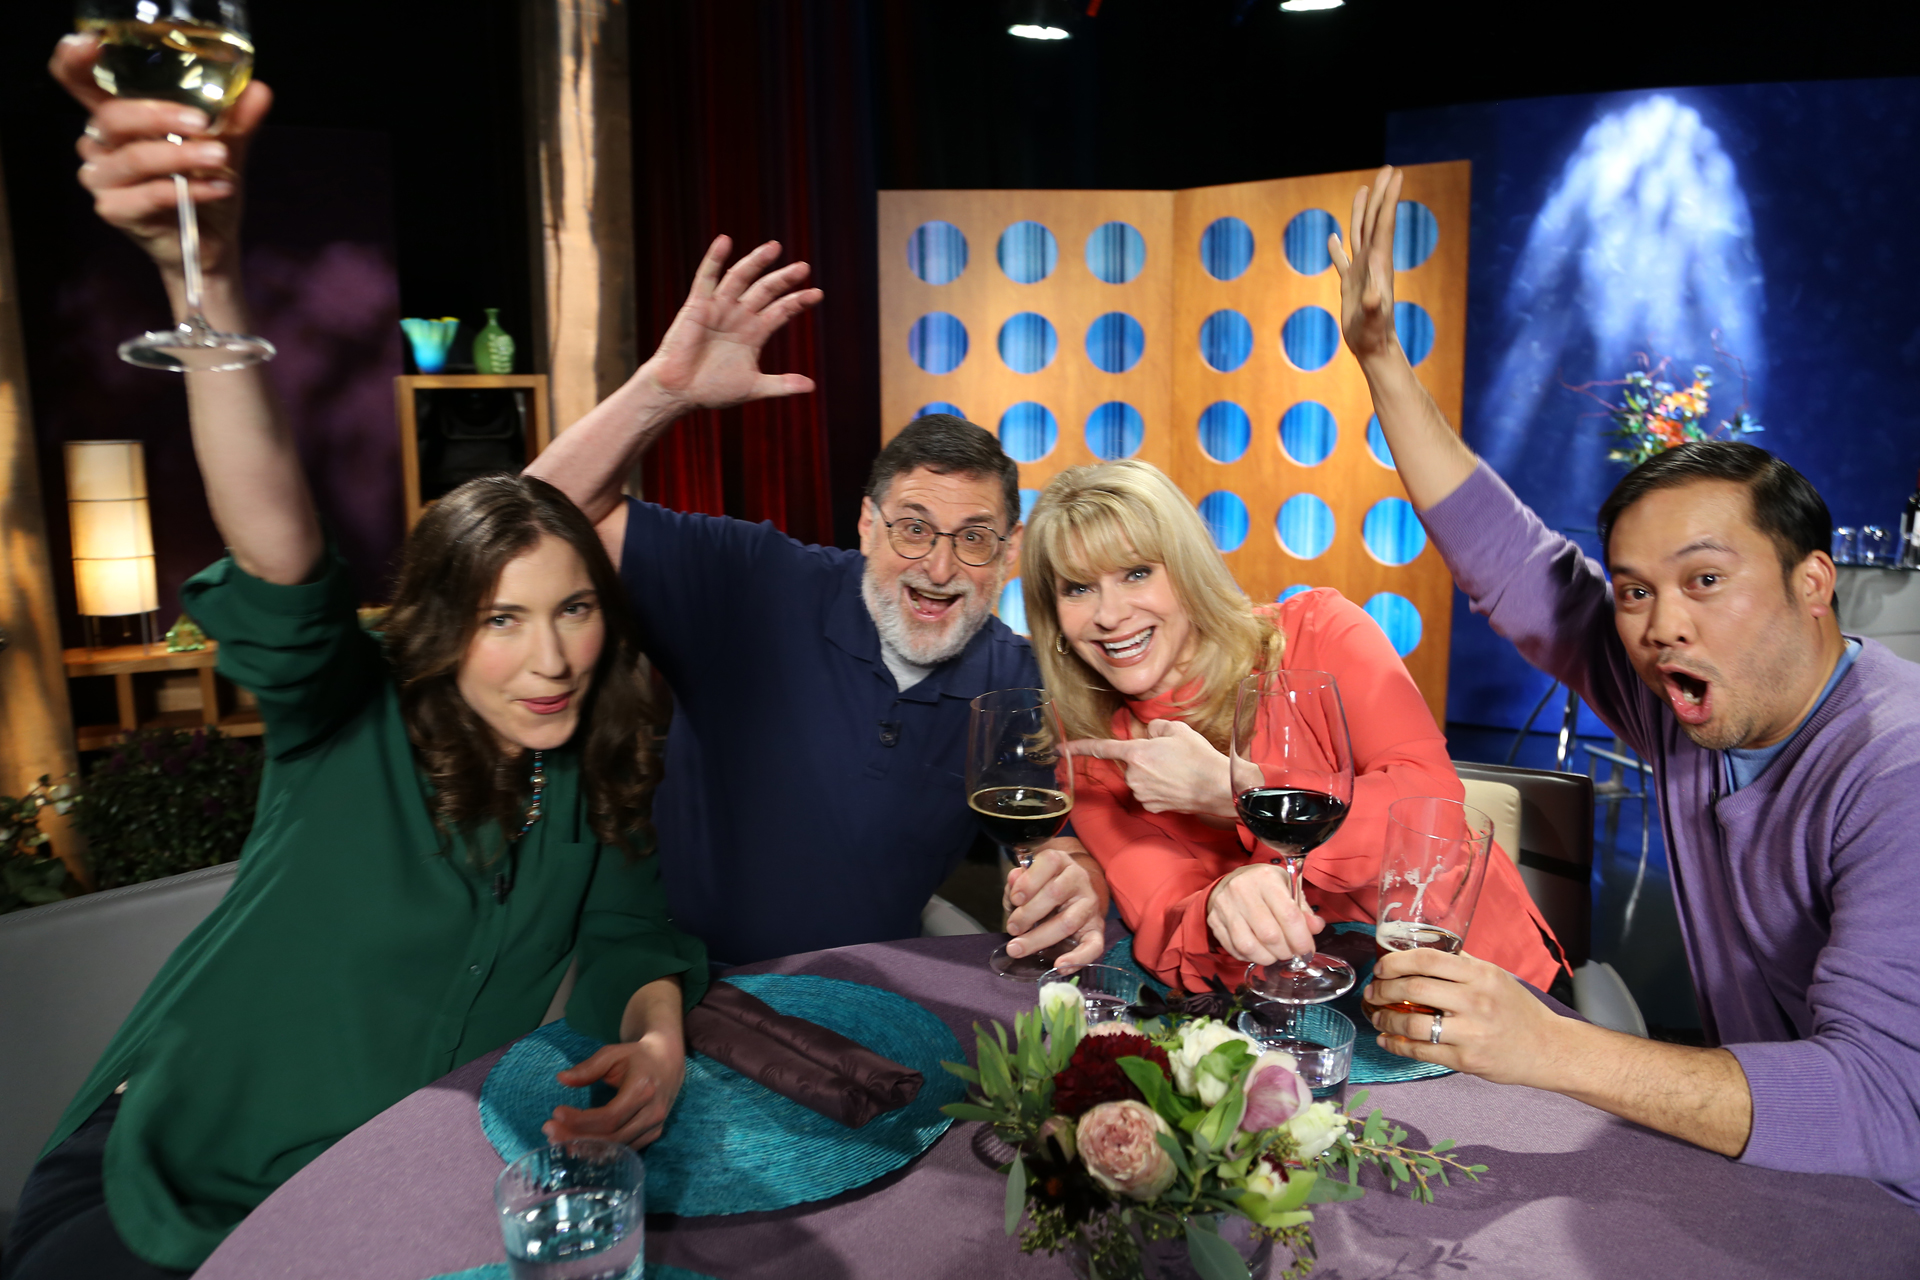 Host Leslie Sbrocco and guests having fun on the set of season 12 episode 4.